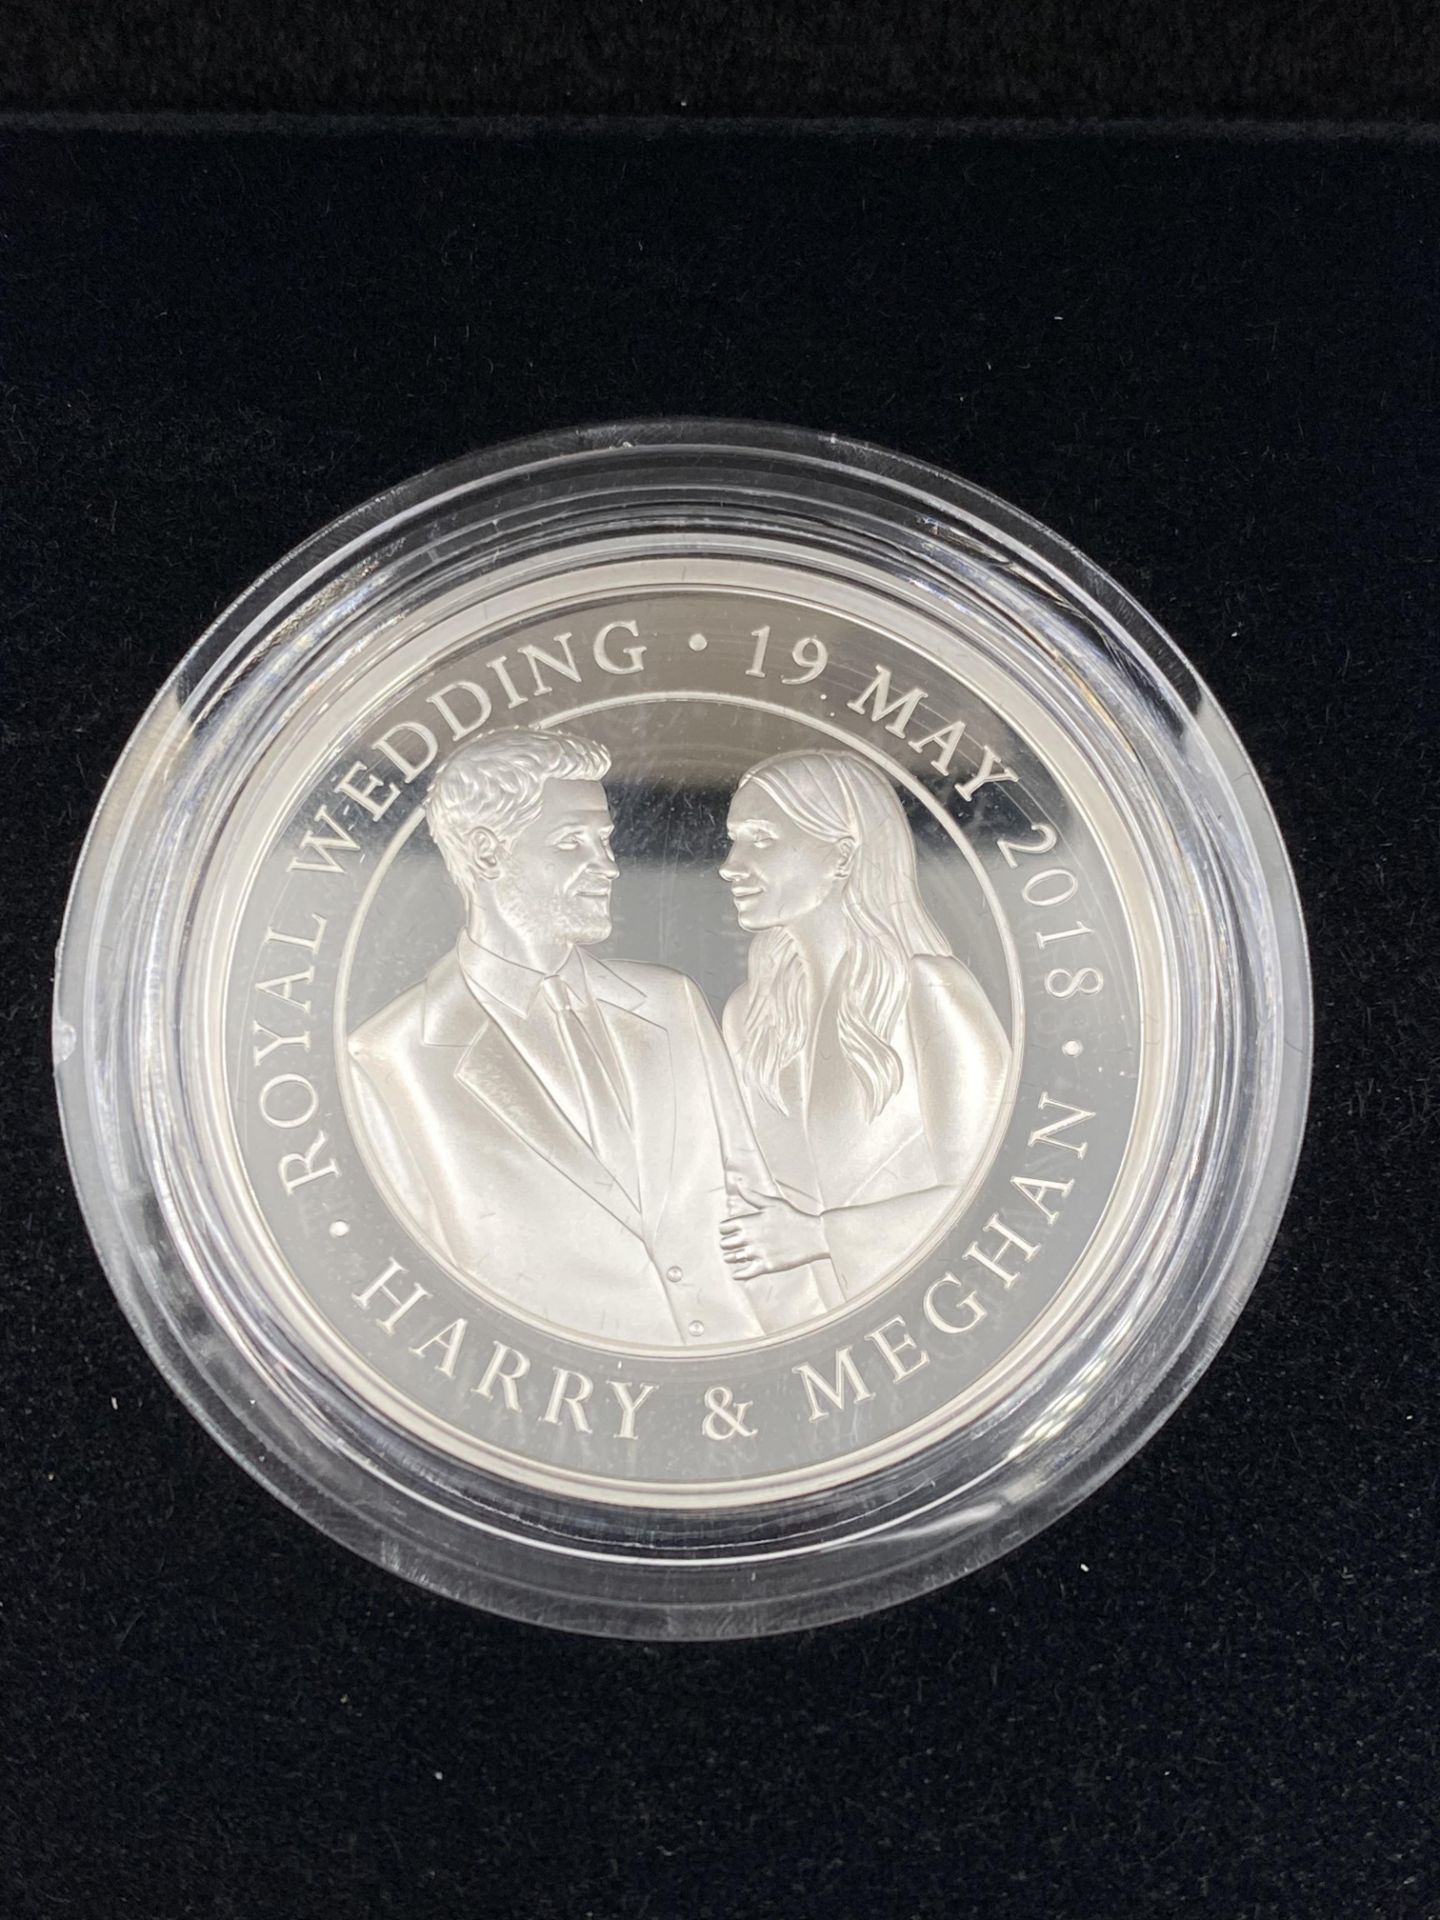 Royal Mint Royal Wedding 2018 £5 silver proof coin - Image 2 of 5